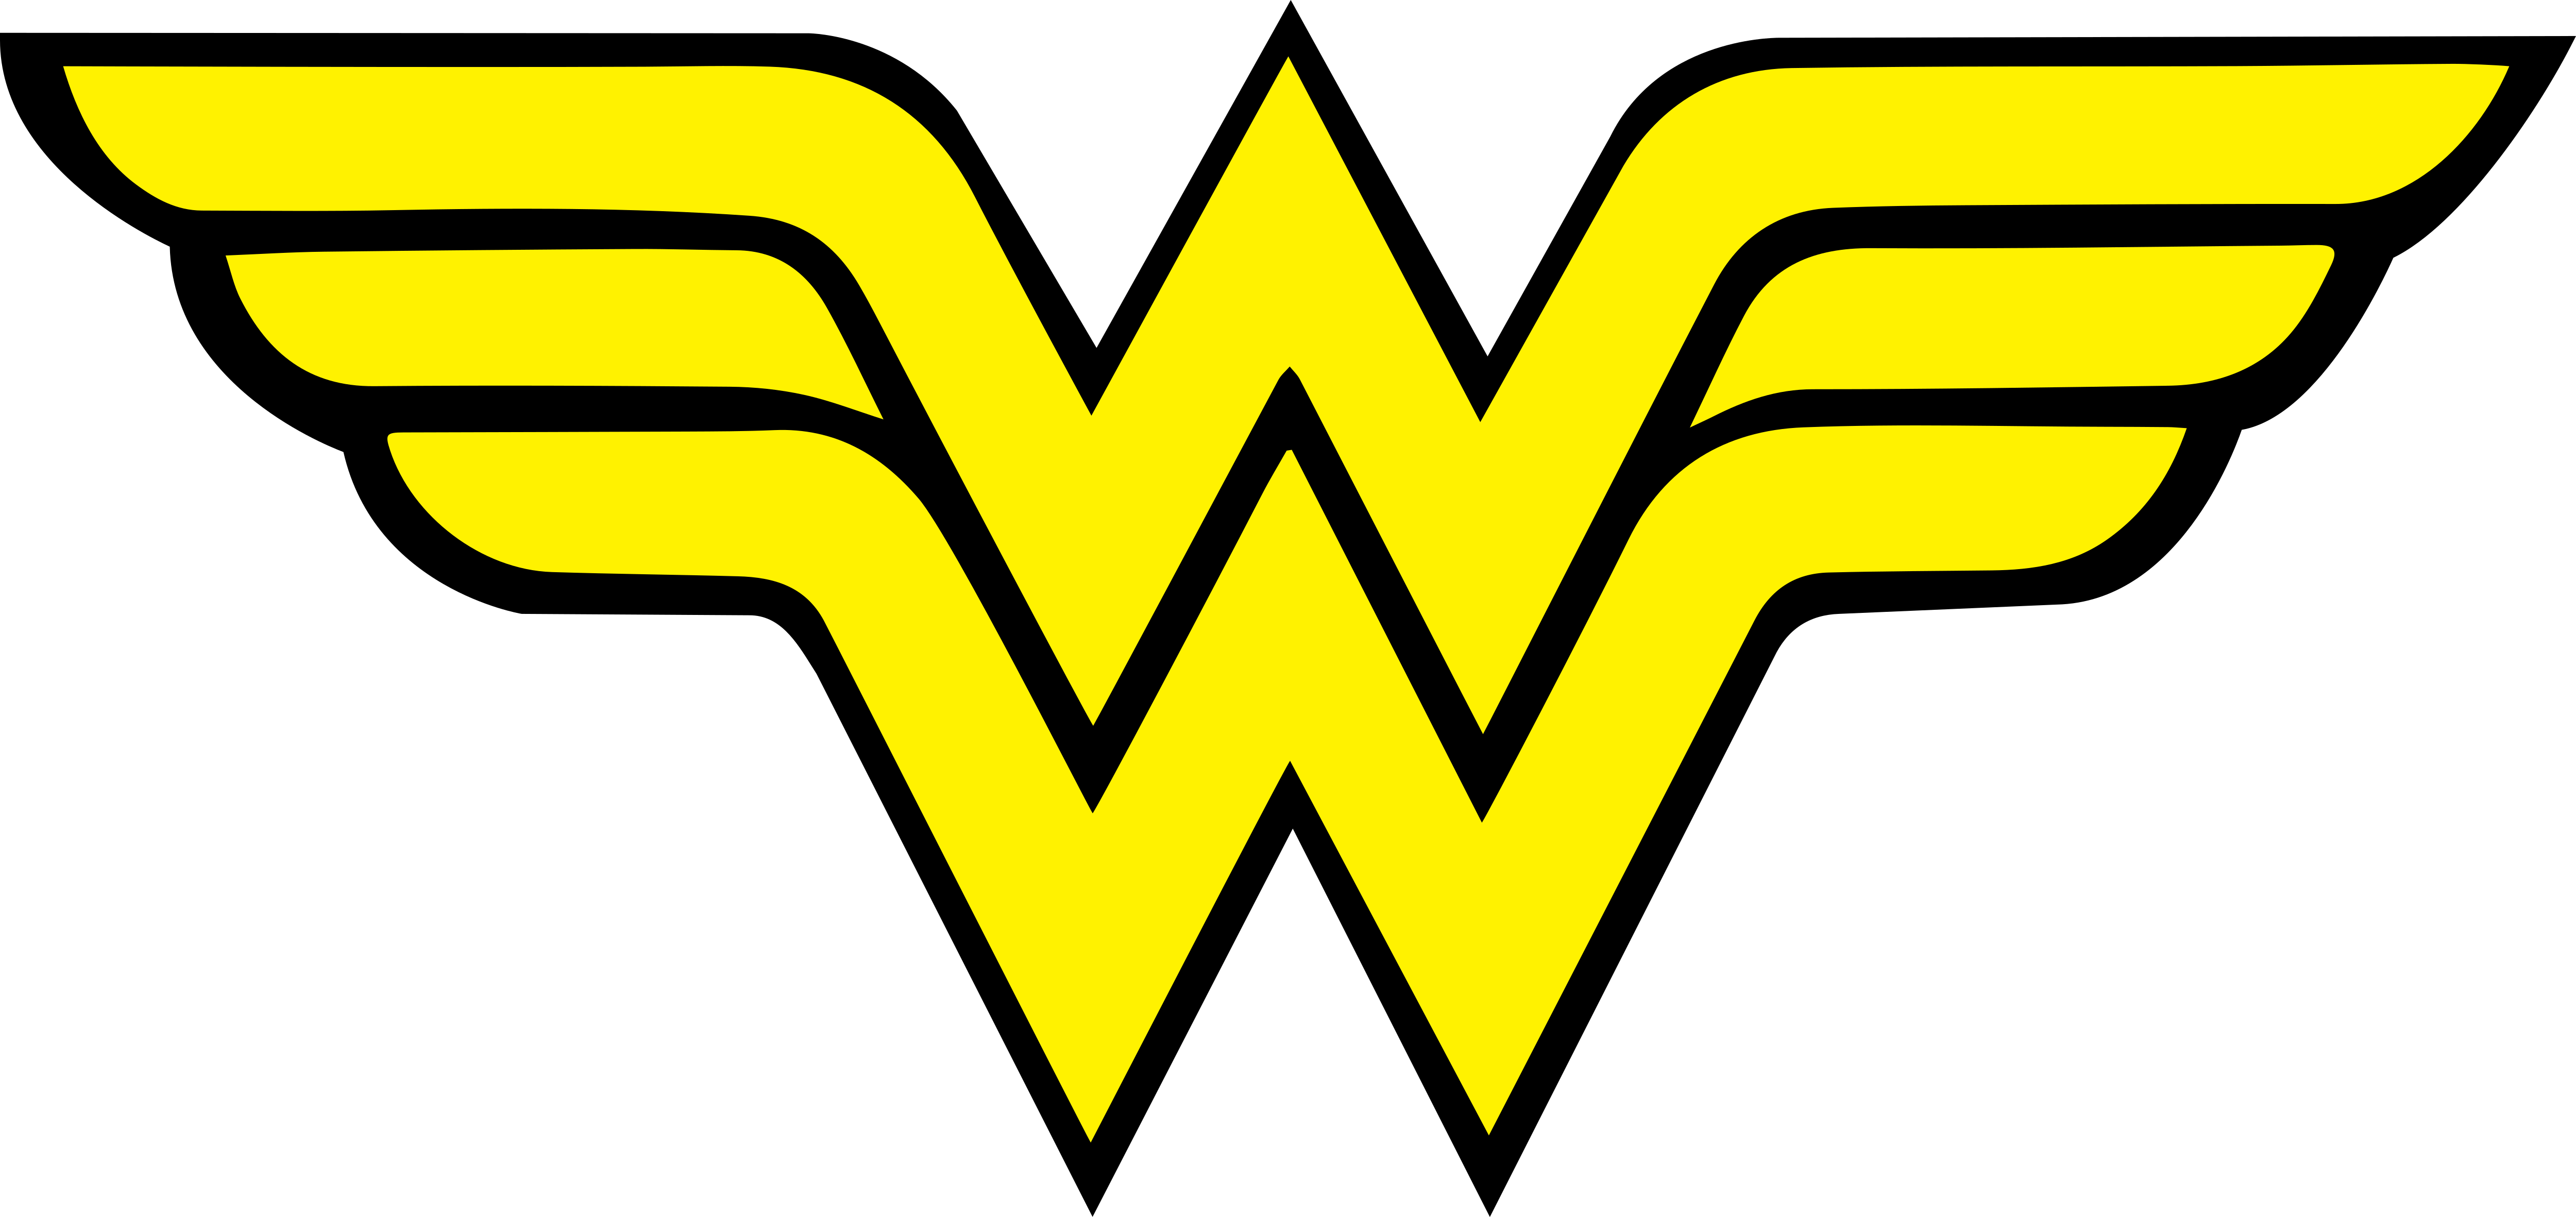 The logo of Wonder Woman from DC comics. It is two interlocking letter Ws.